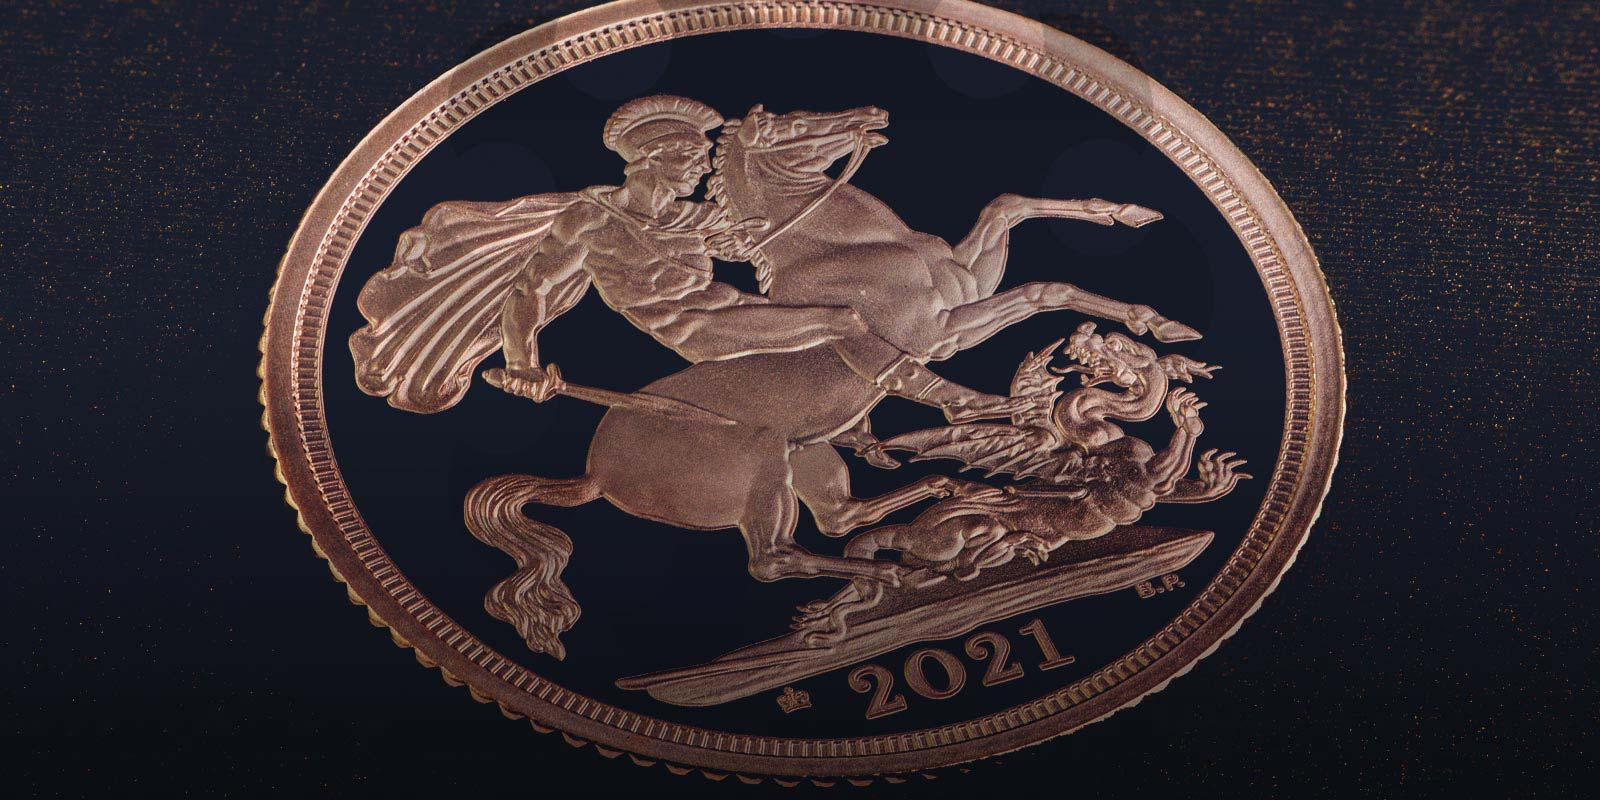 A special edition of the coin of the monarch - Sovereign